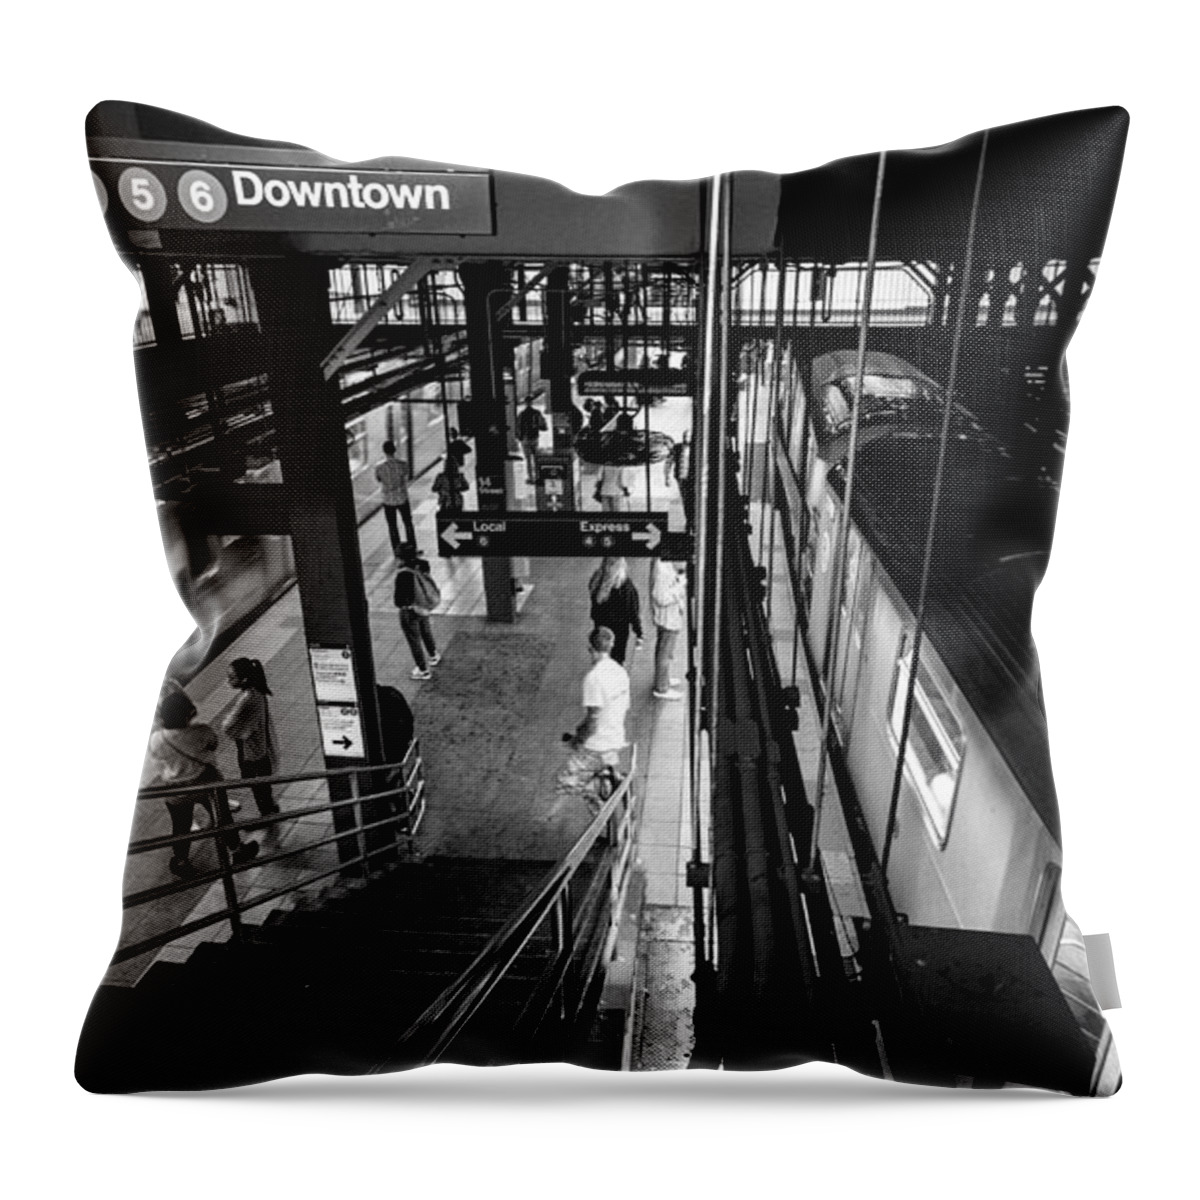 Subway Throw Pillow featuring the photograph Downtown Platform, Lexington Ave Line at 14th St-Union Square St by Steve Ember